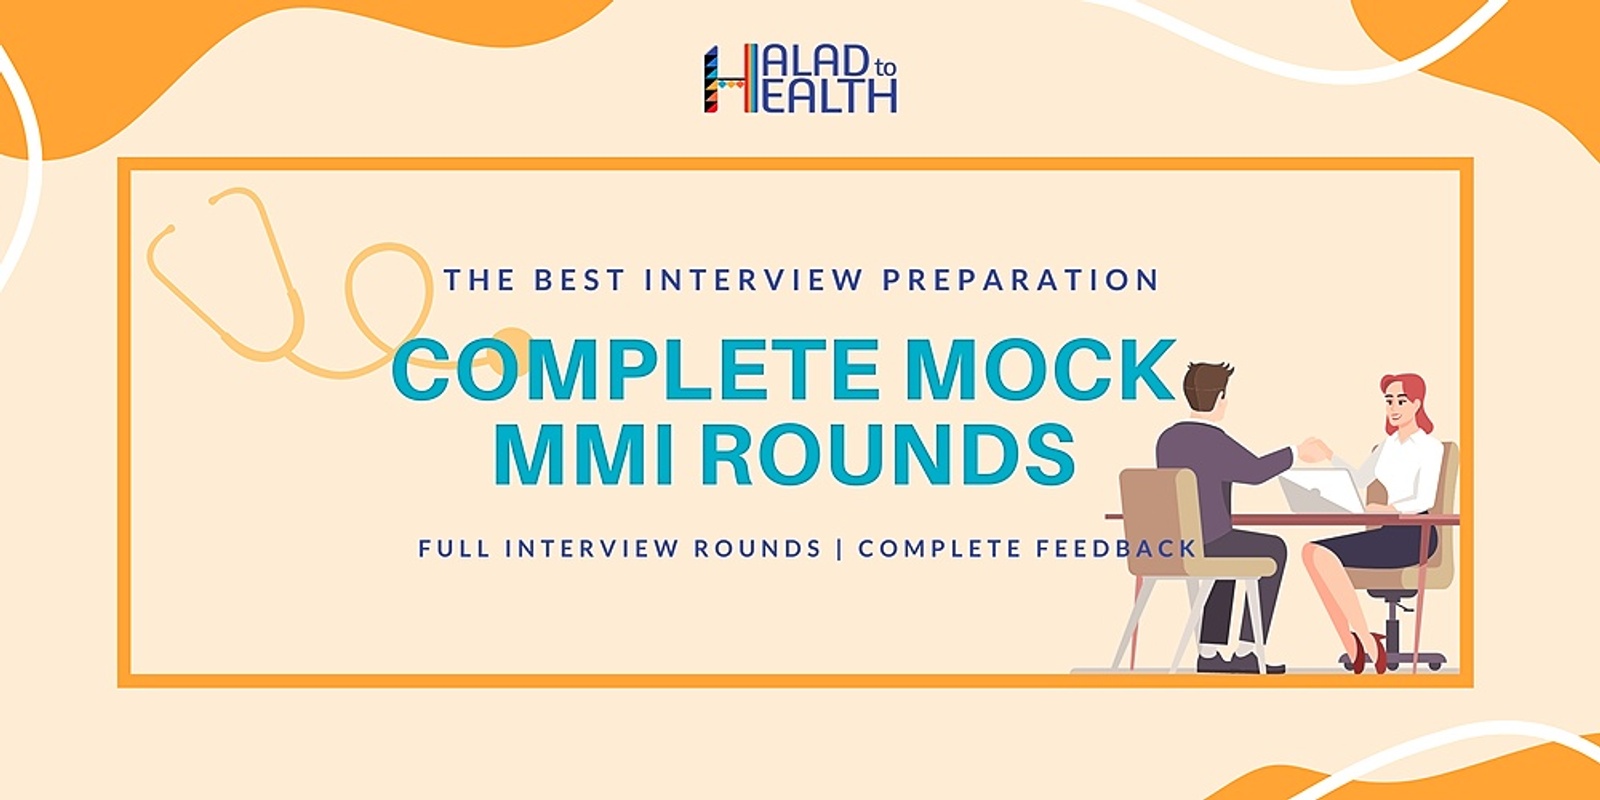 💥 Med Interviews: The Complete Mock MMI Rounds Online| Halad to Health